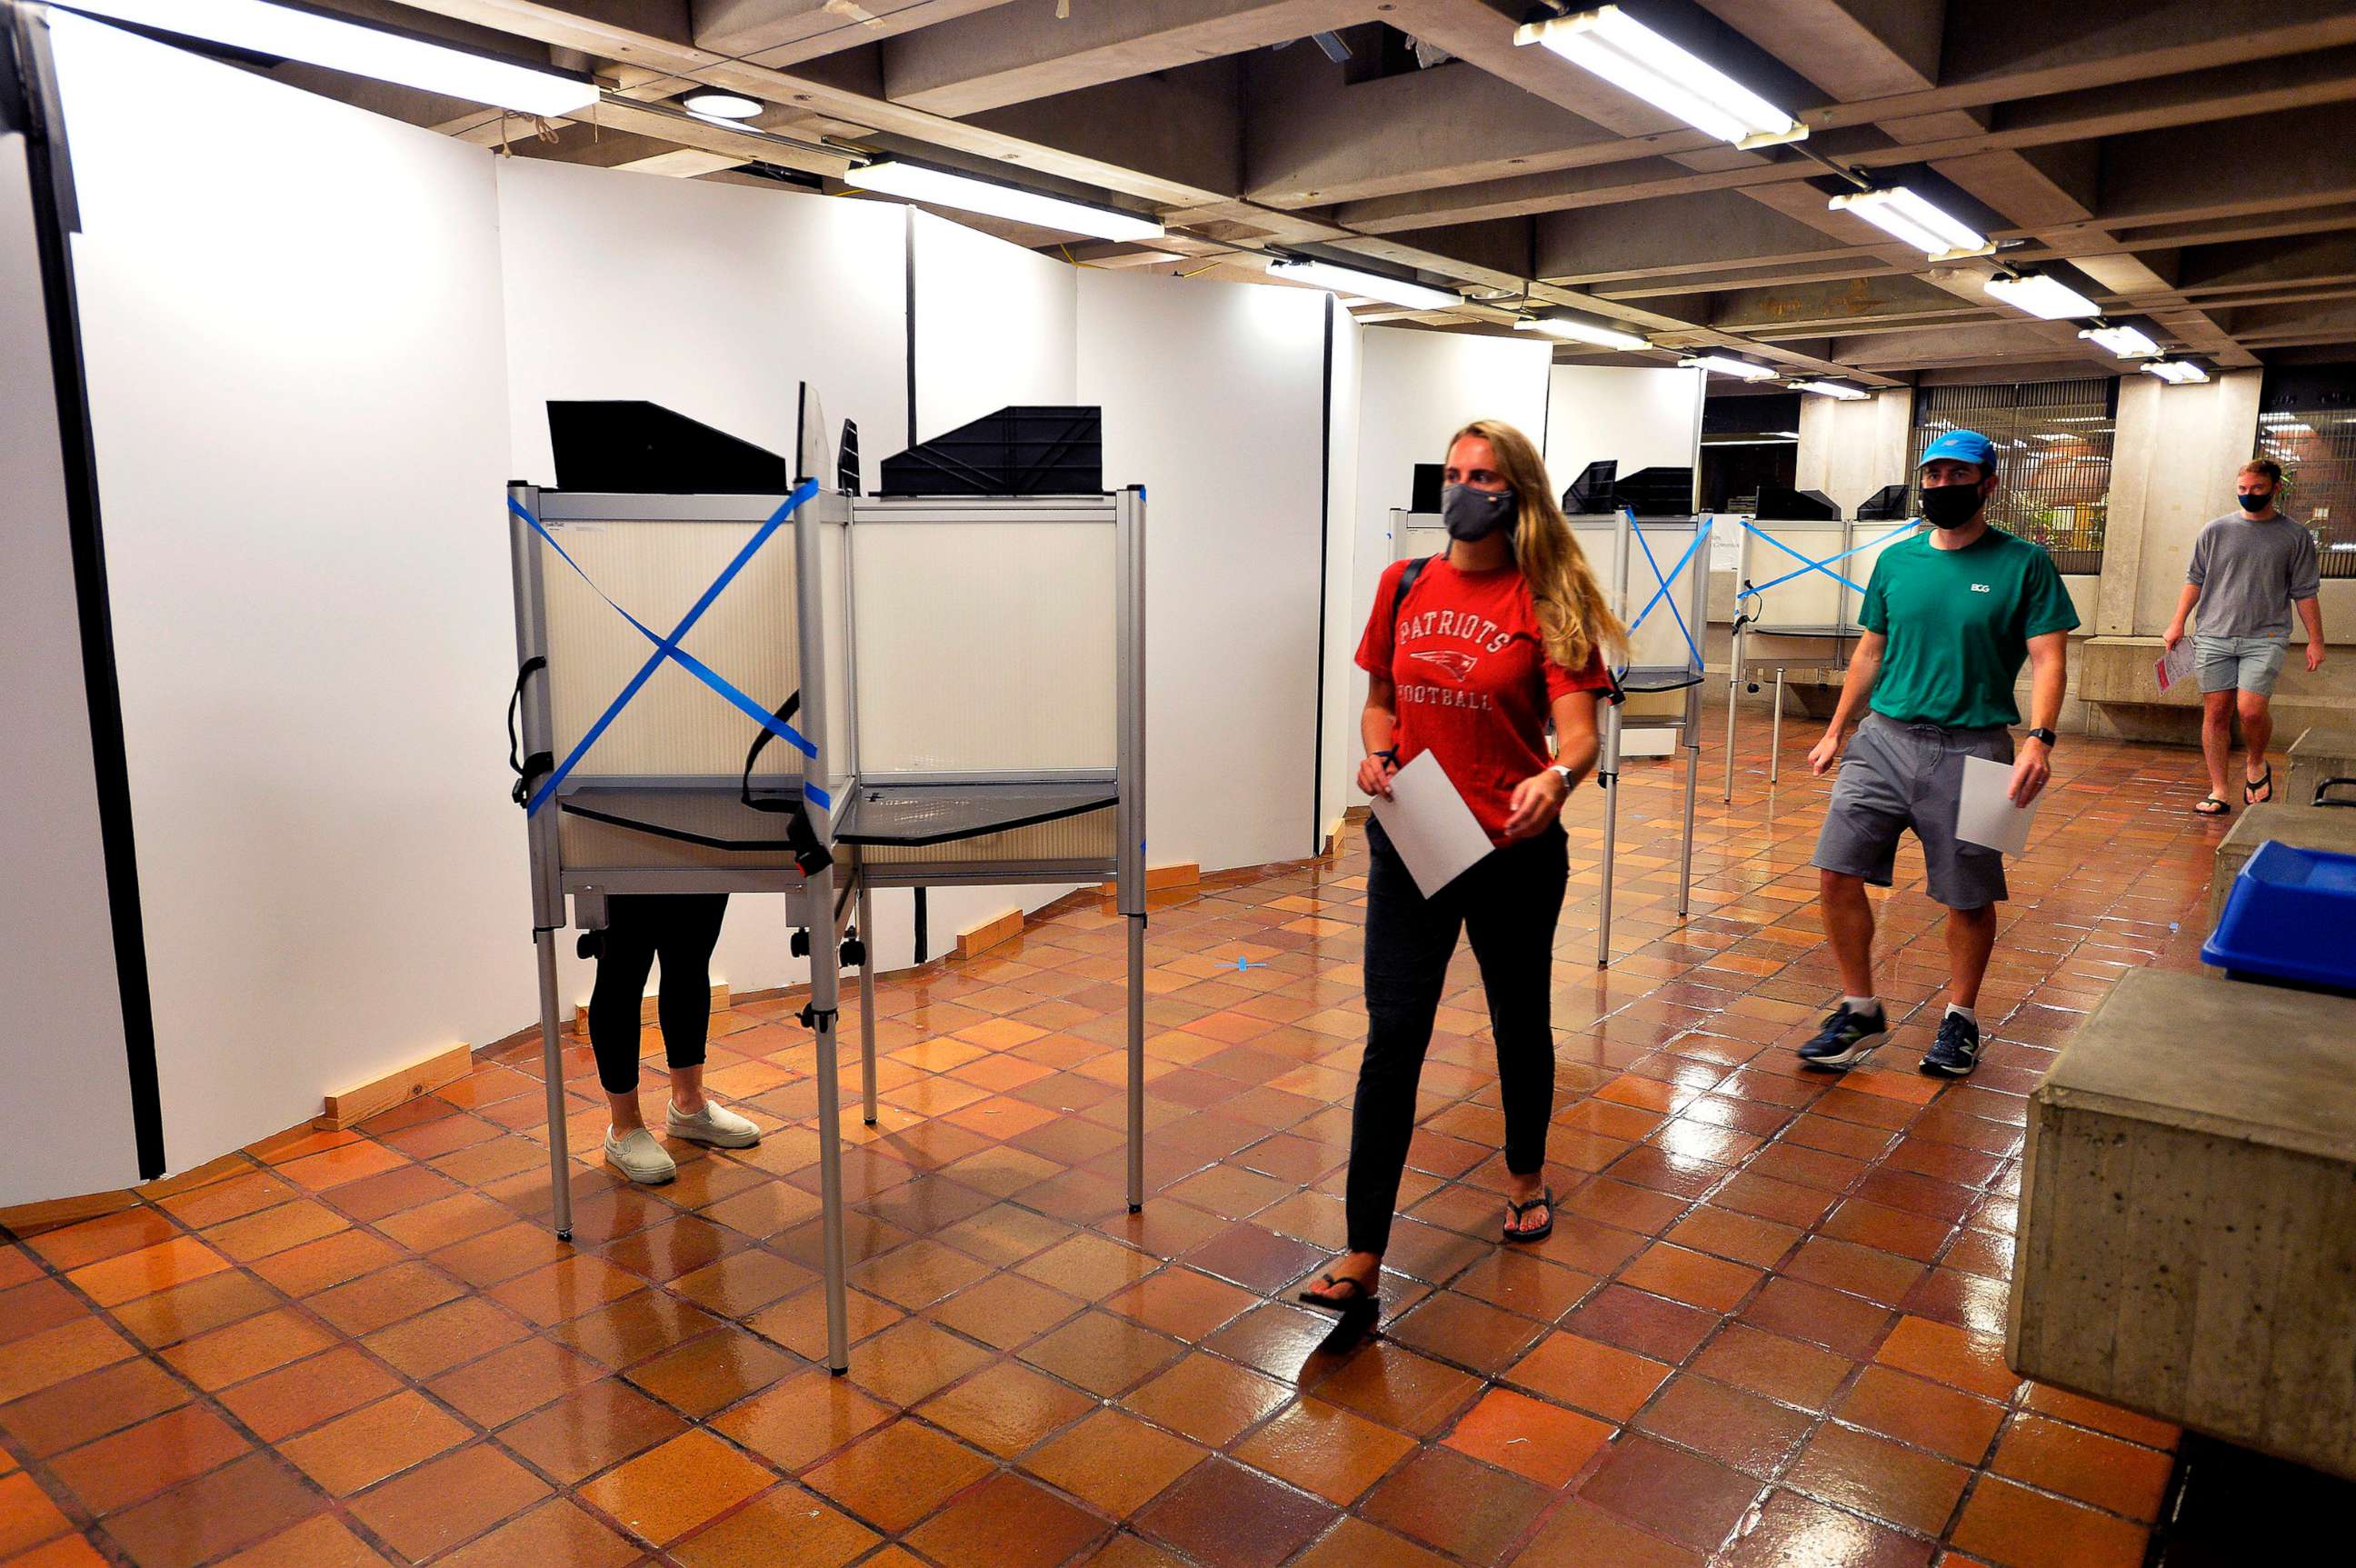 PHOTO: Voters with their ballots leave the polling booths at Boston City Hall during the Massachusetts State Primary on Sept. 1, 2020 in Boston.